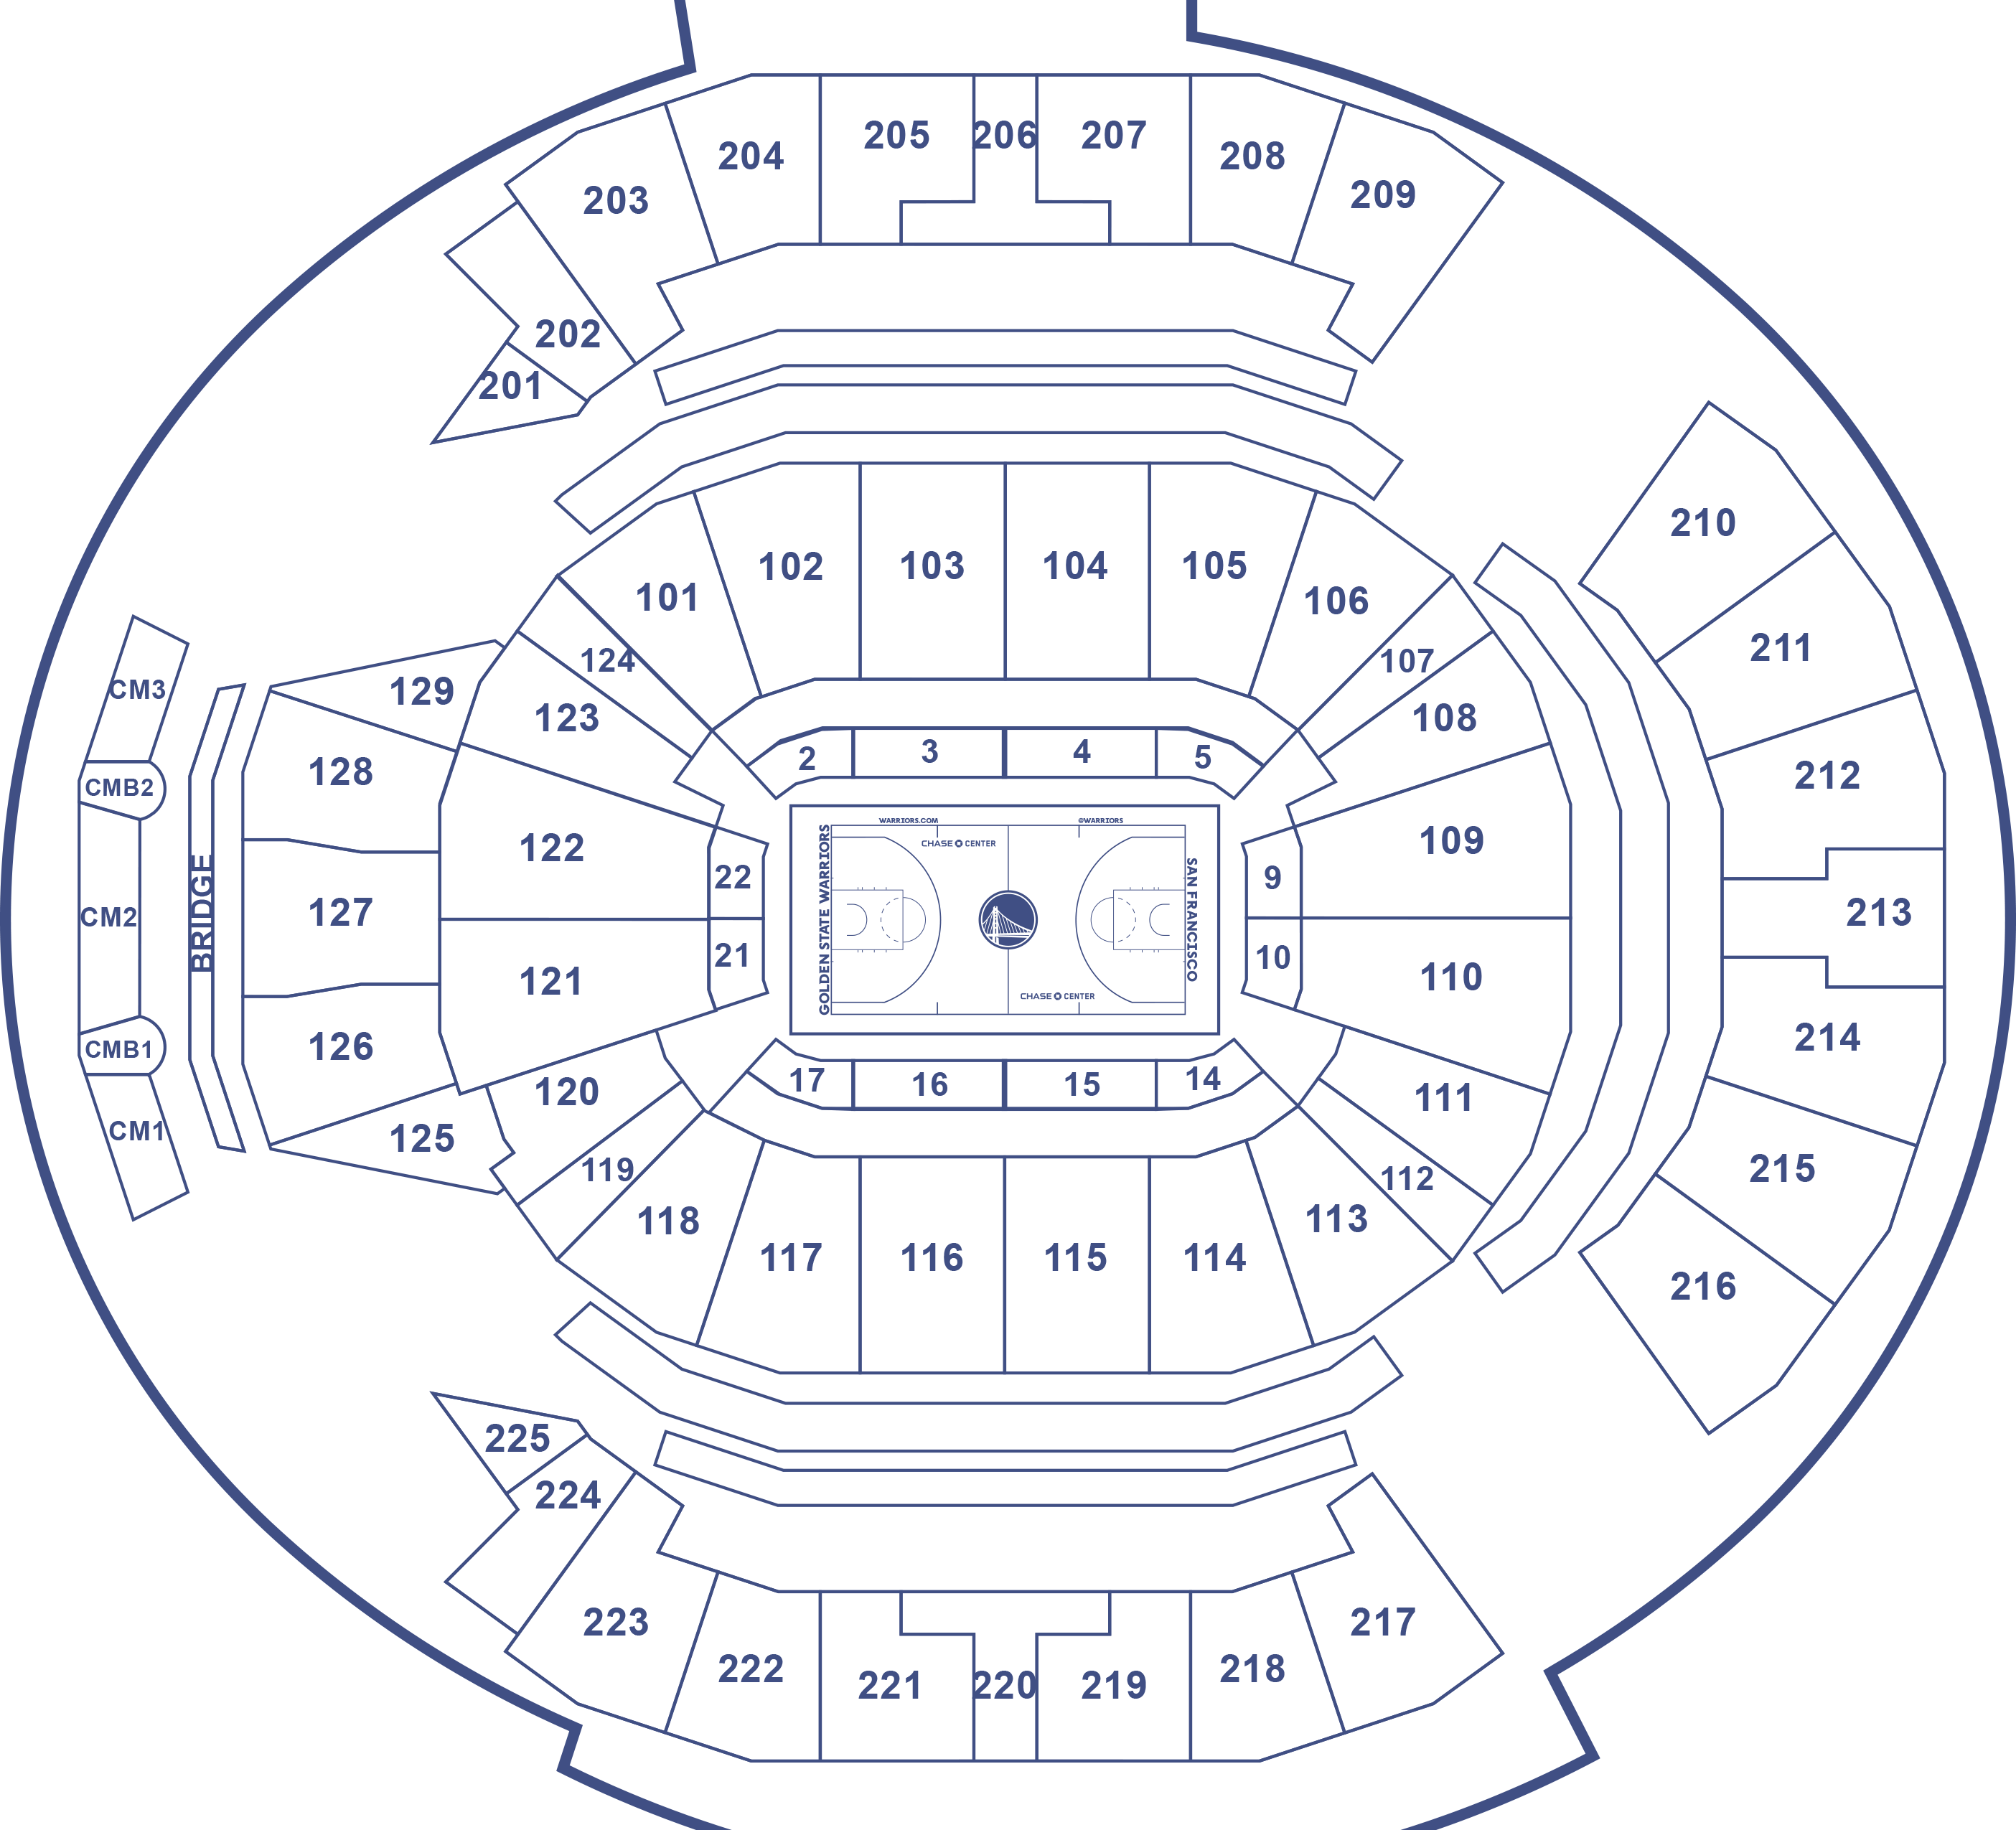 Seating Chart For Chase Center